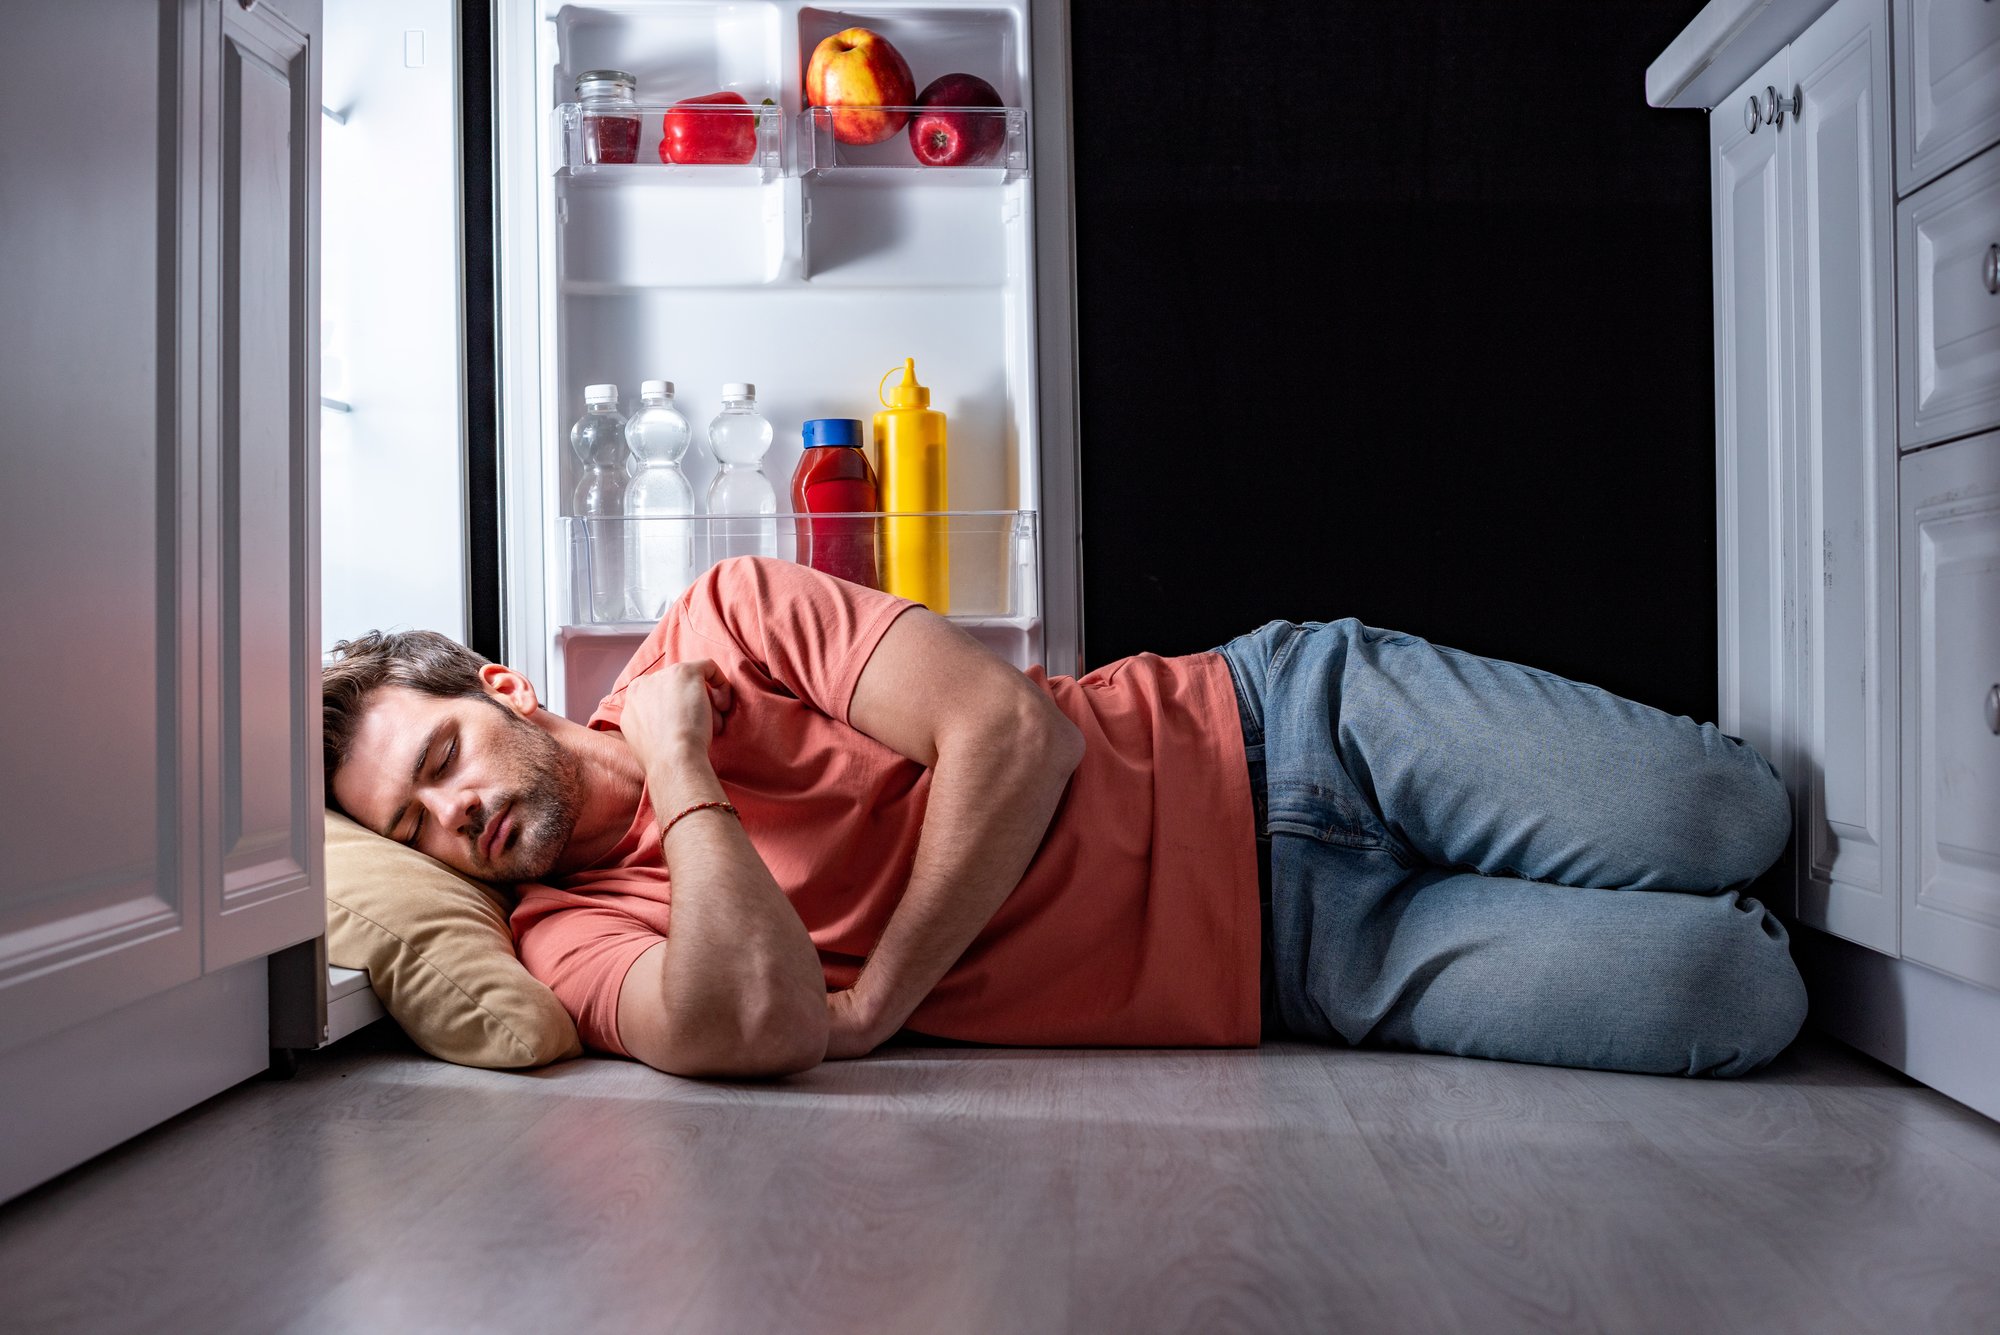 Man sleeping with his head on a pillow in the refrigerator